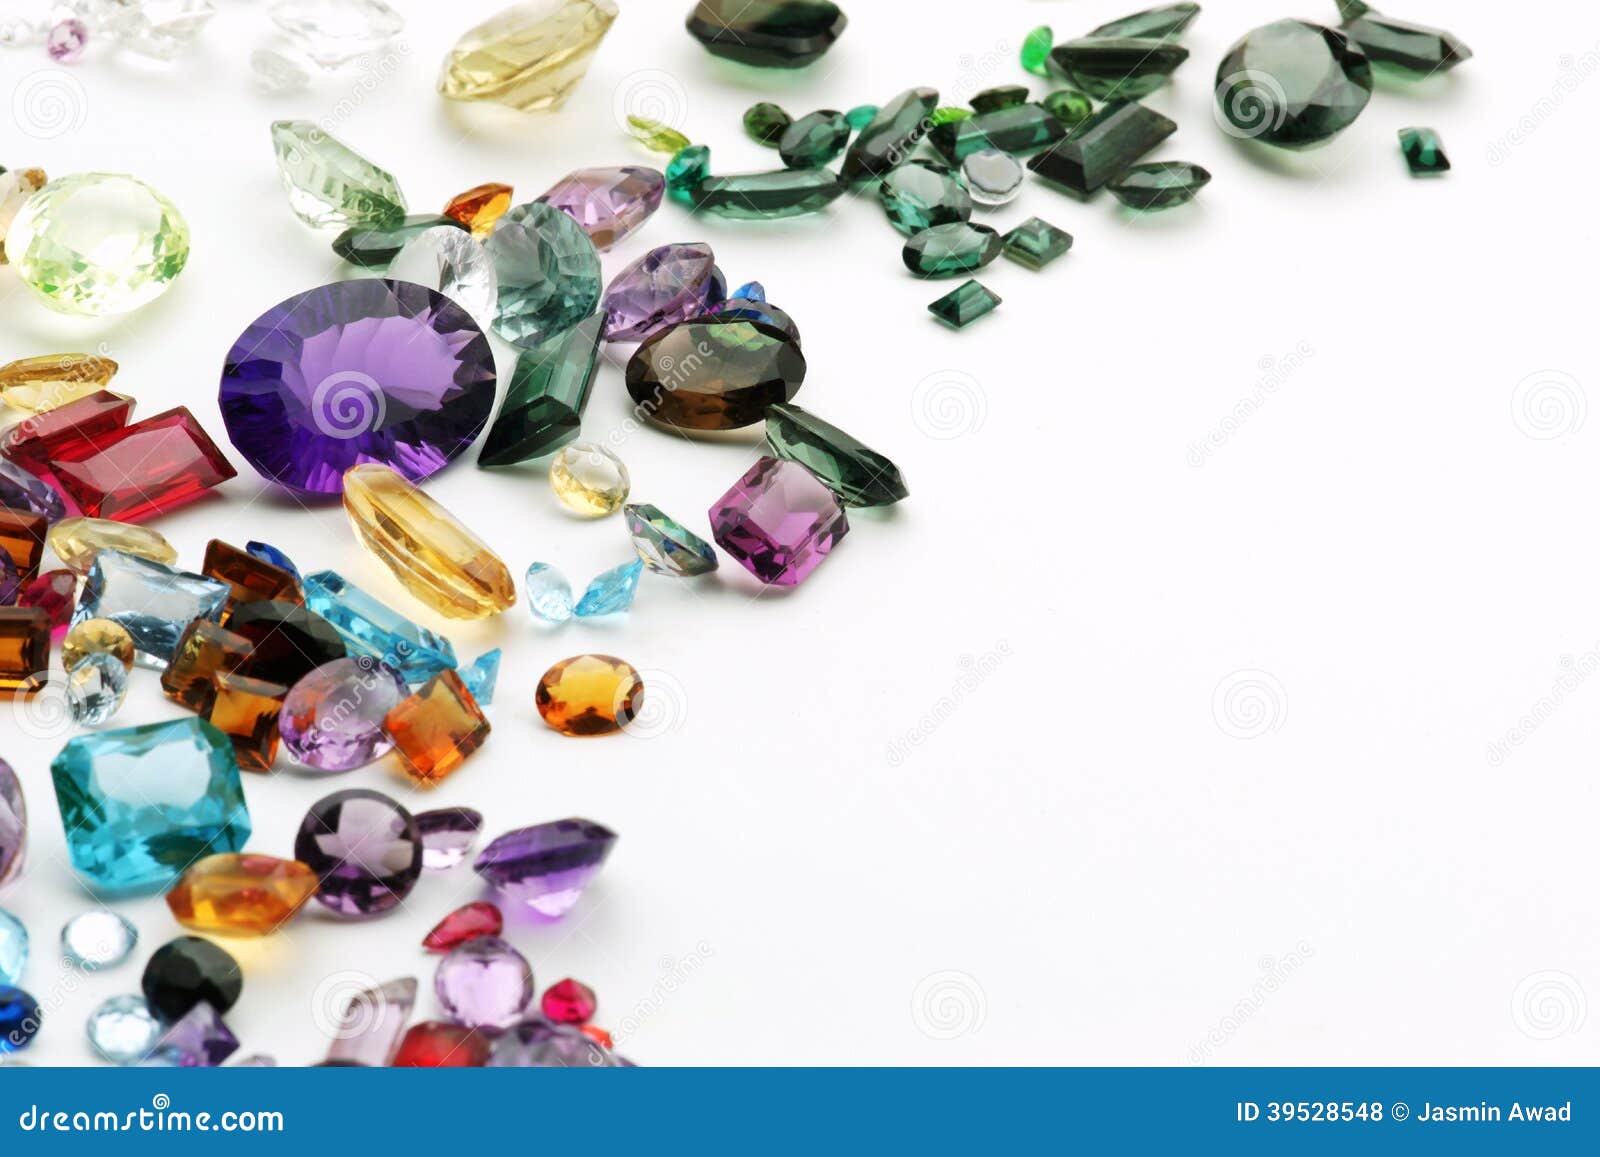 authentic gemstones with copy space